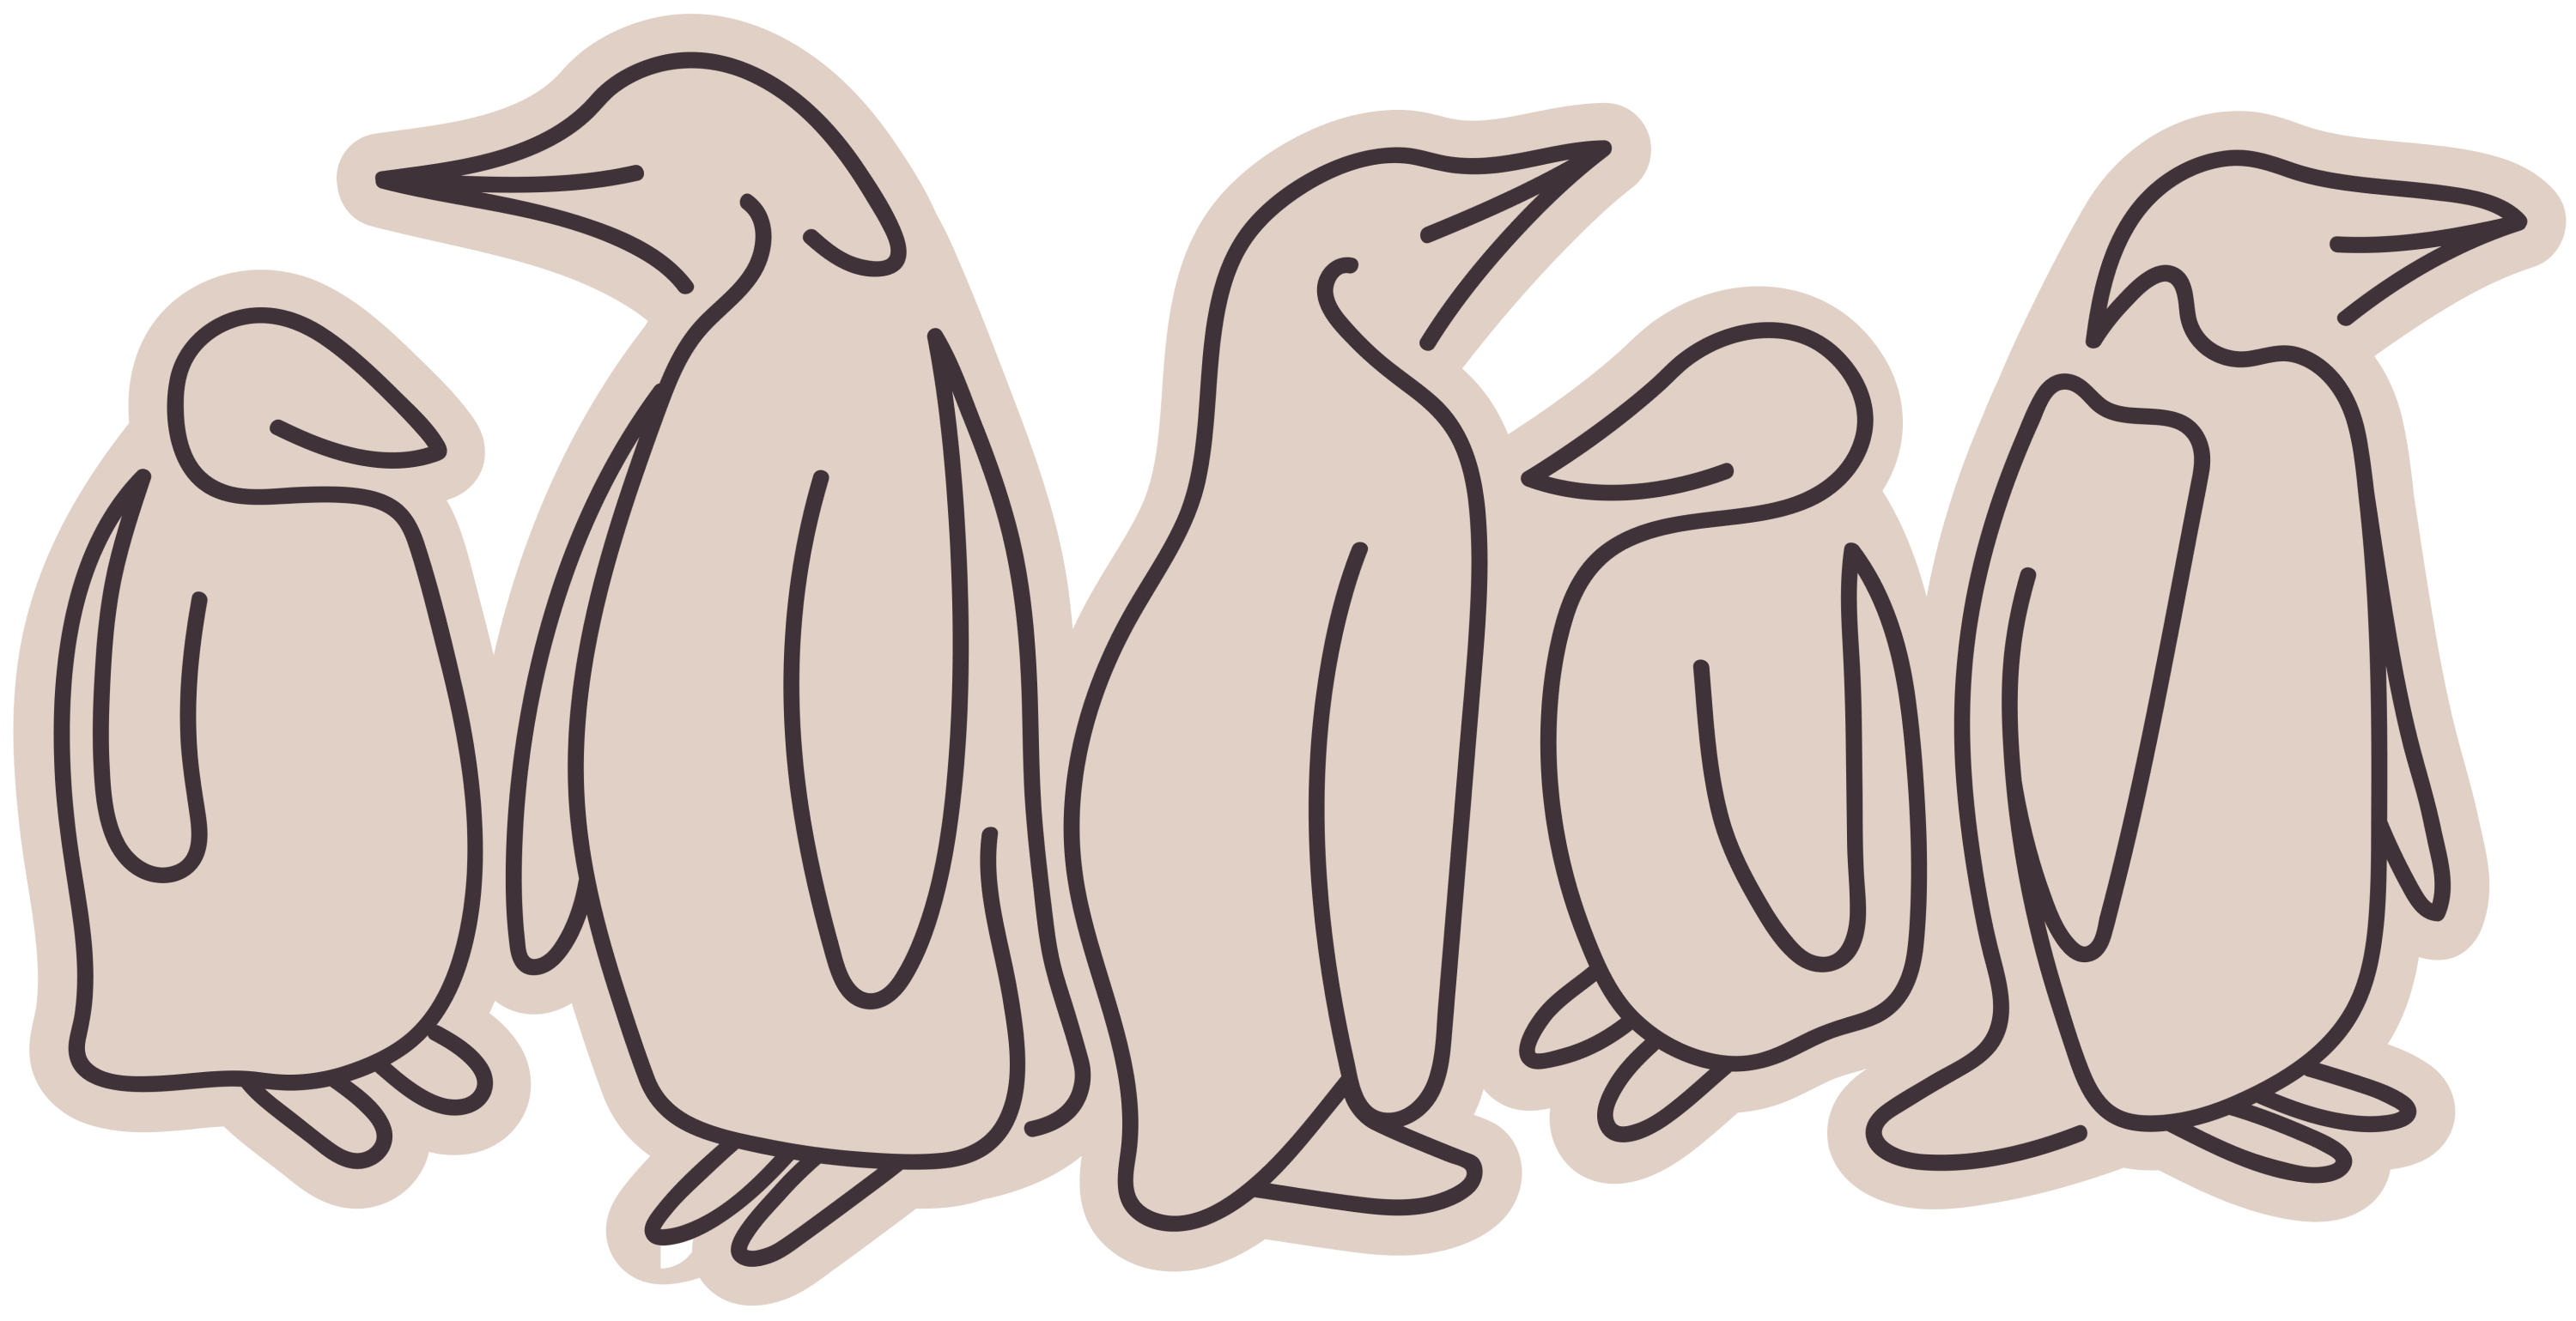 Group of 5 penguins